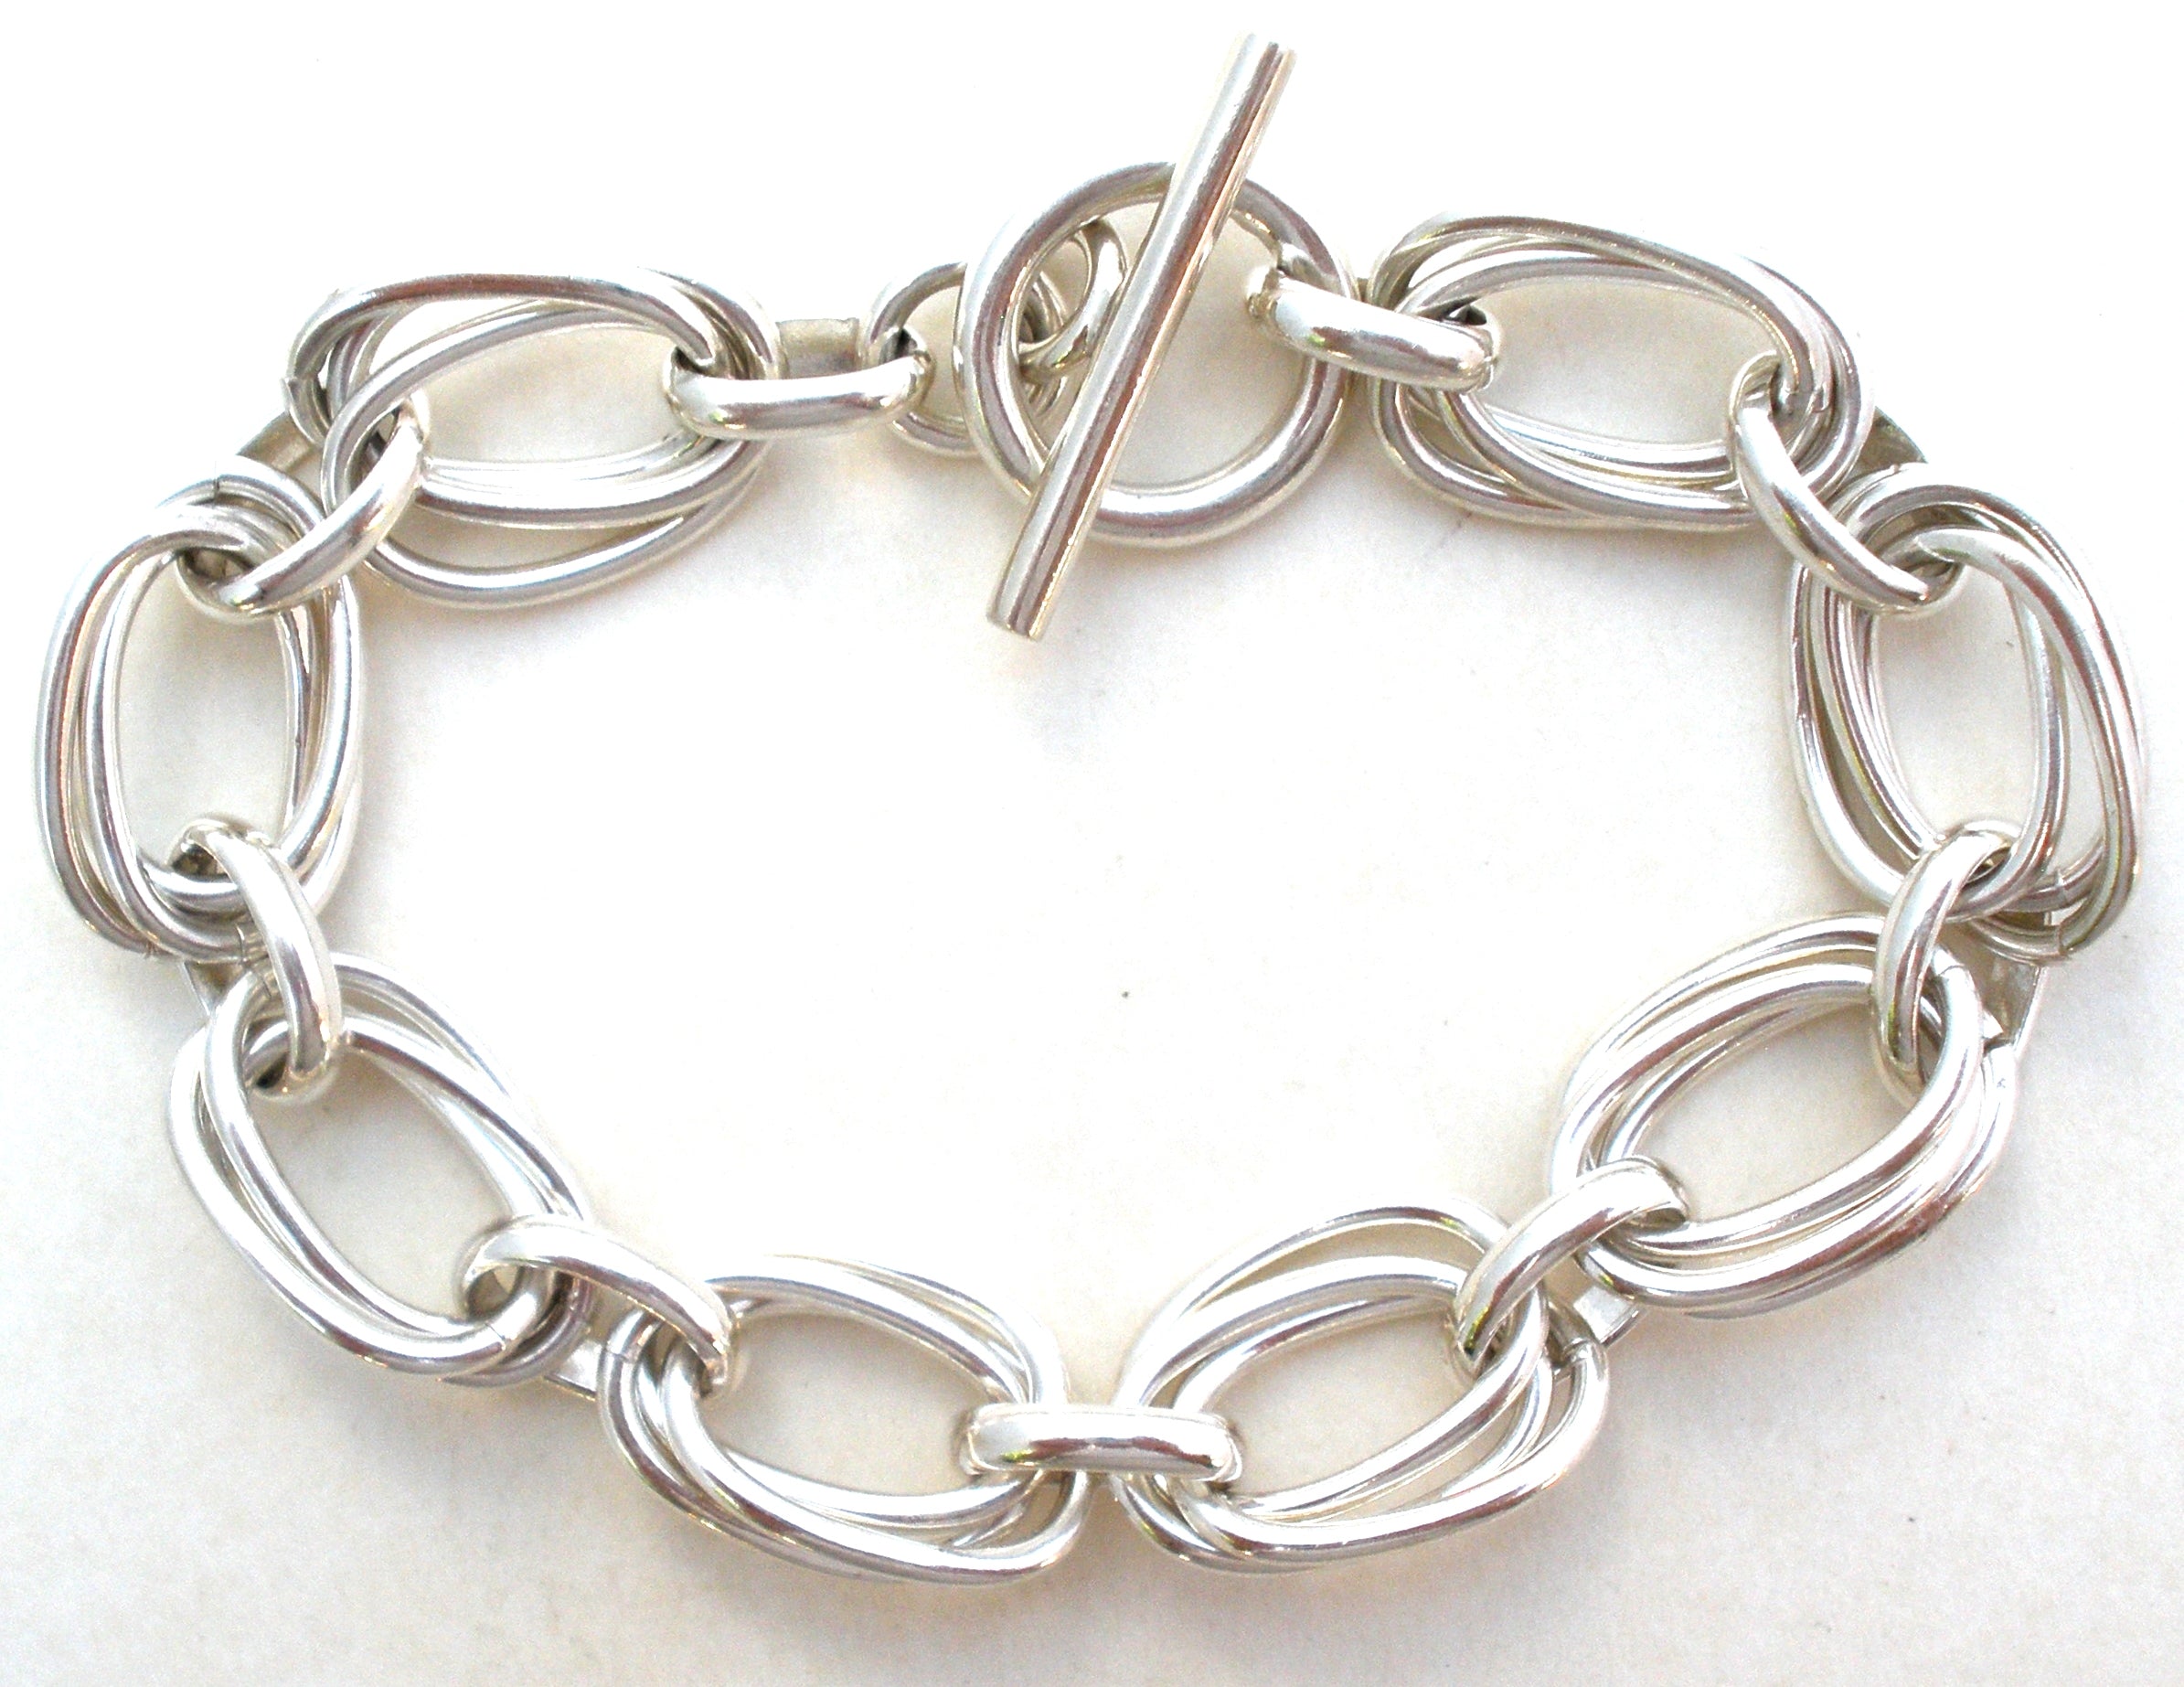 Mexican Charm Bracelet, Sterling Silver, Double Link Chain, Nine